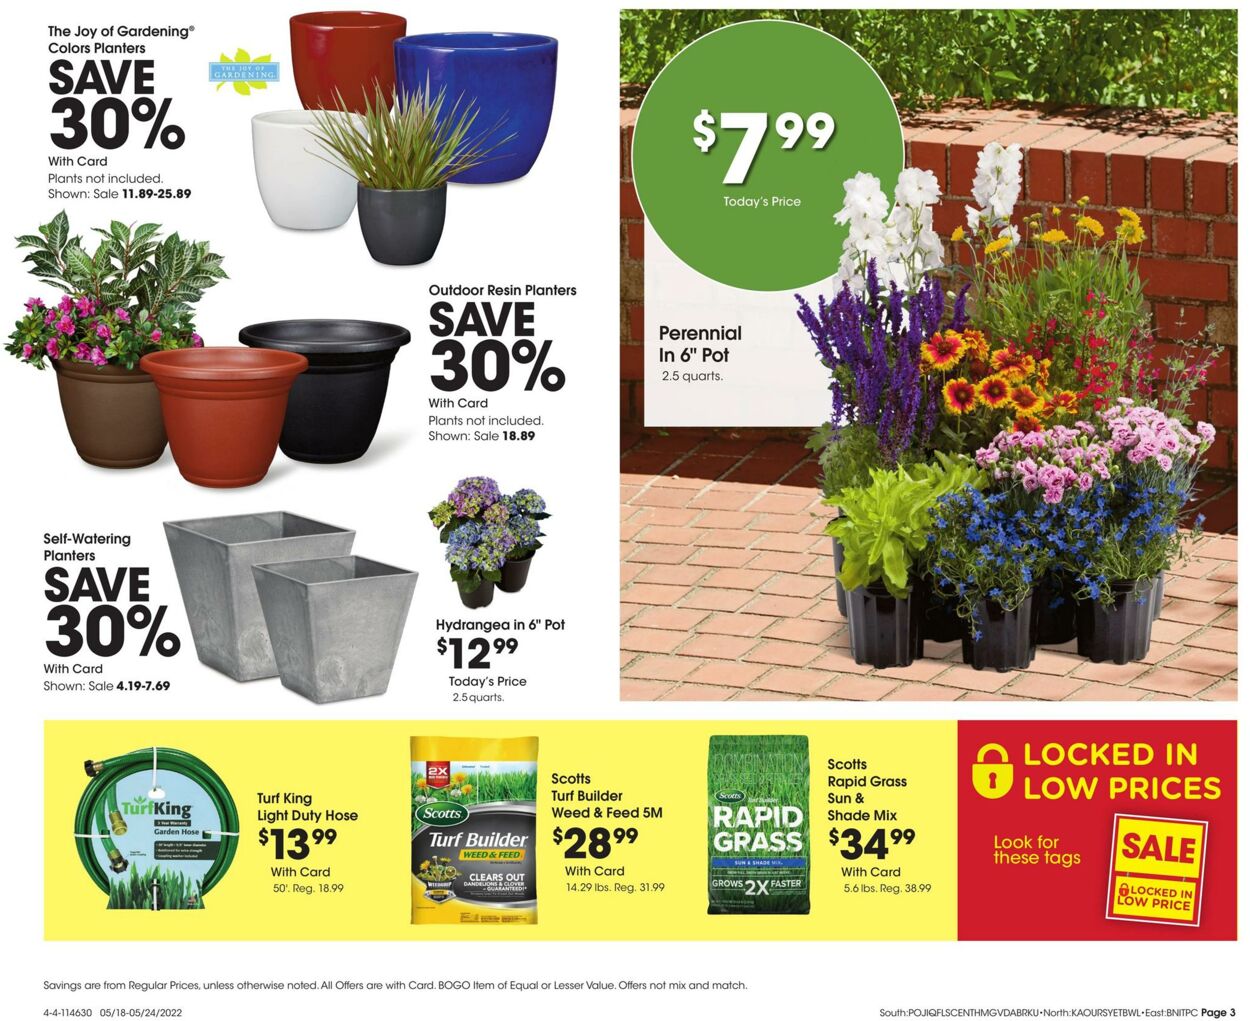 Weekly ad Fred Meyer 05/18/2022 - 05/24/2022